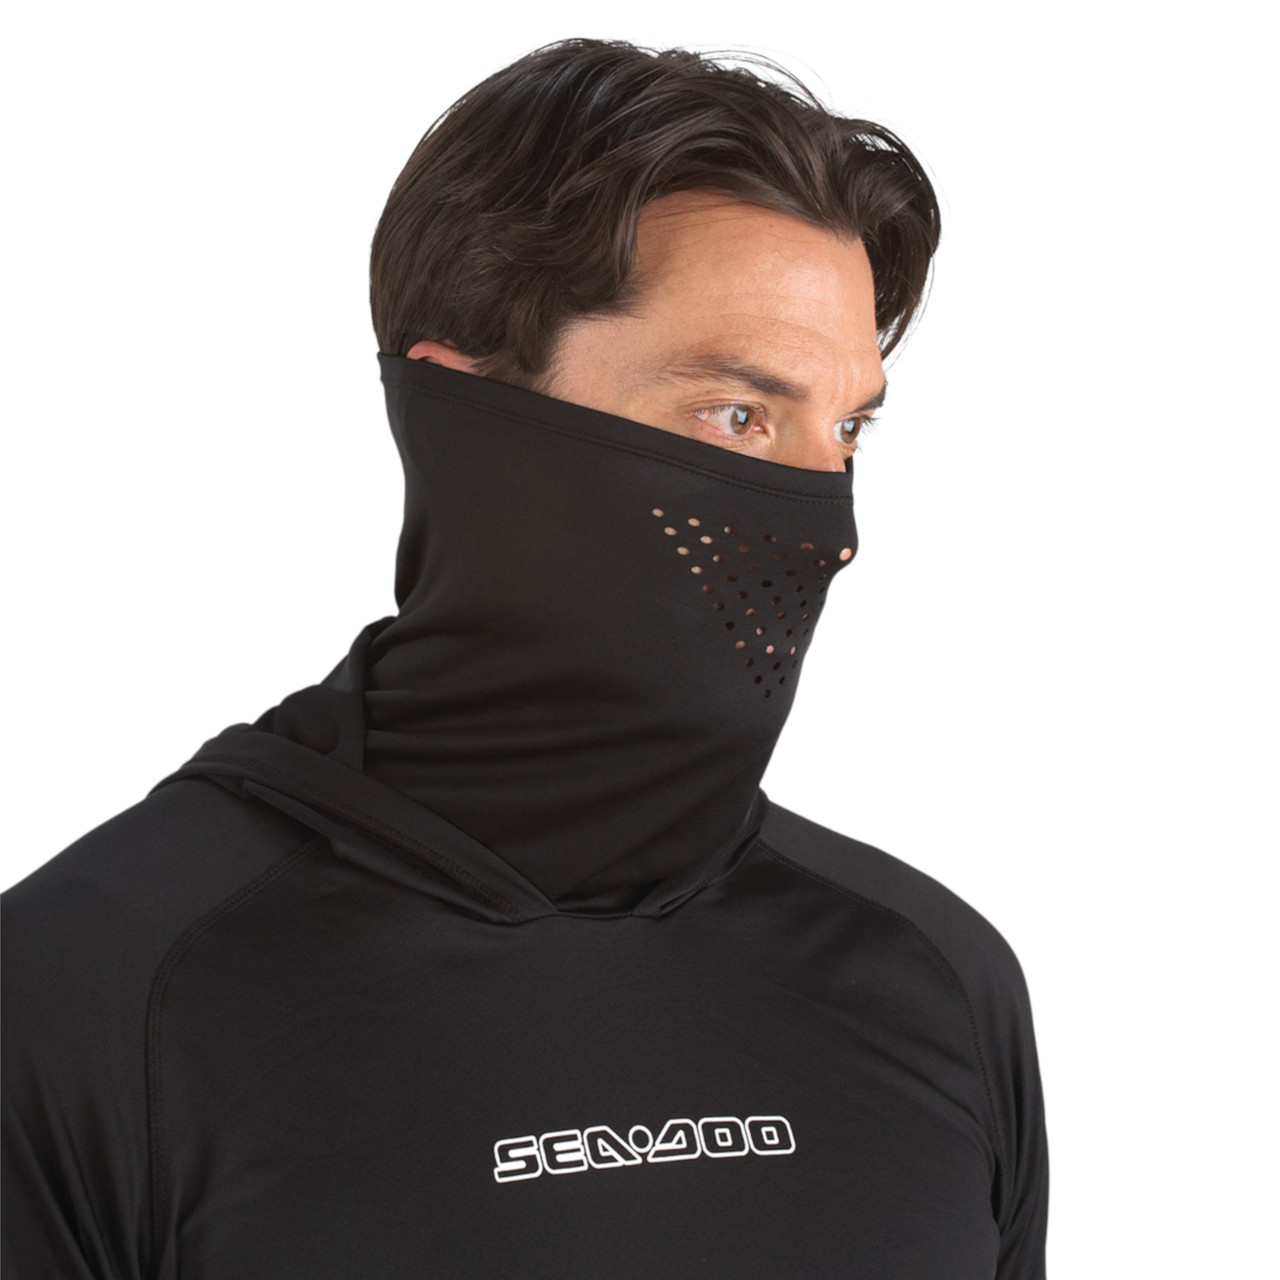 Sea-Doo New OEM, Men's Extra Large Cooling UV Protection Hooded Shirt 4546591290